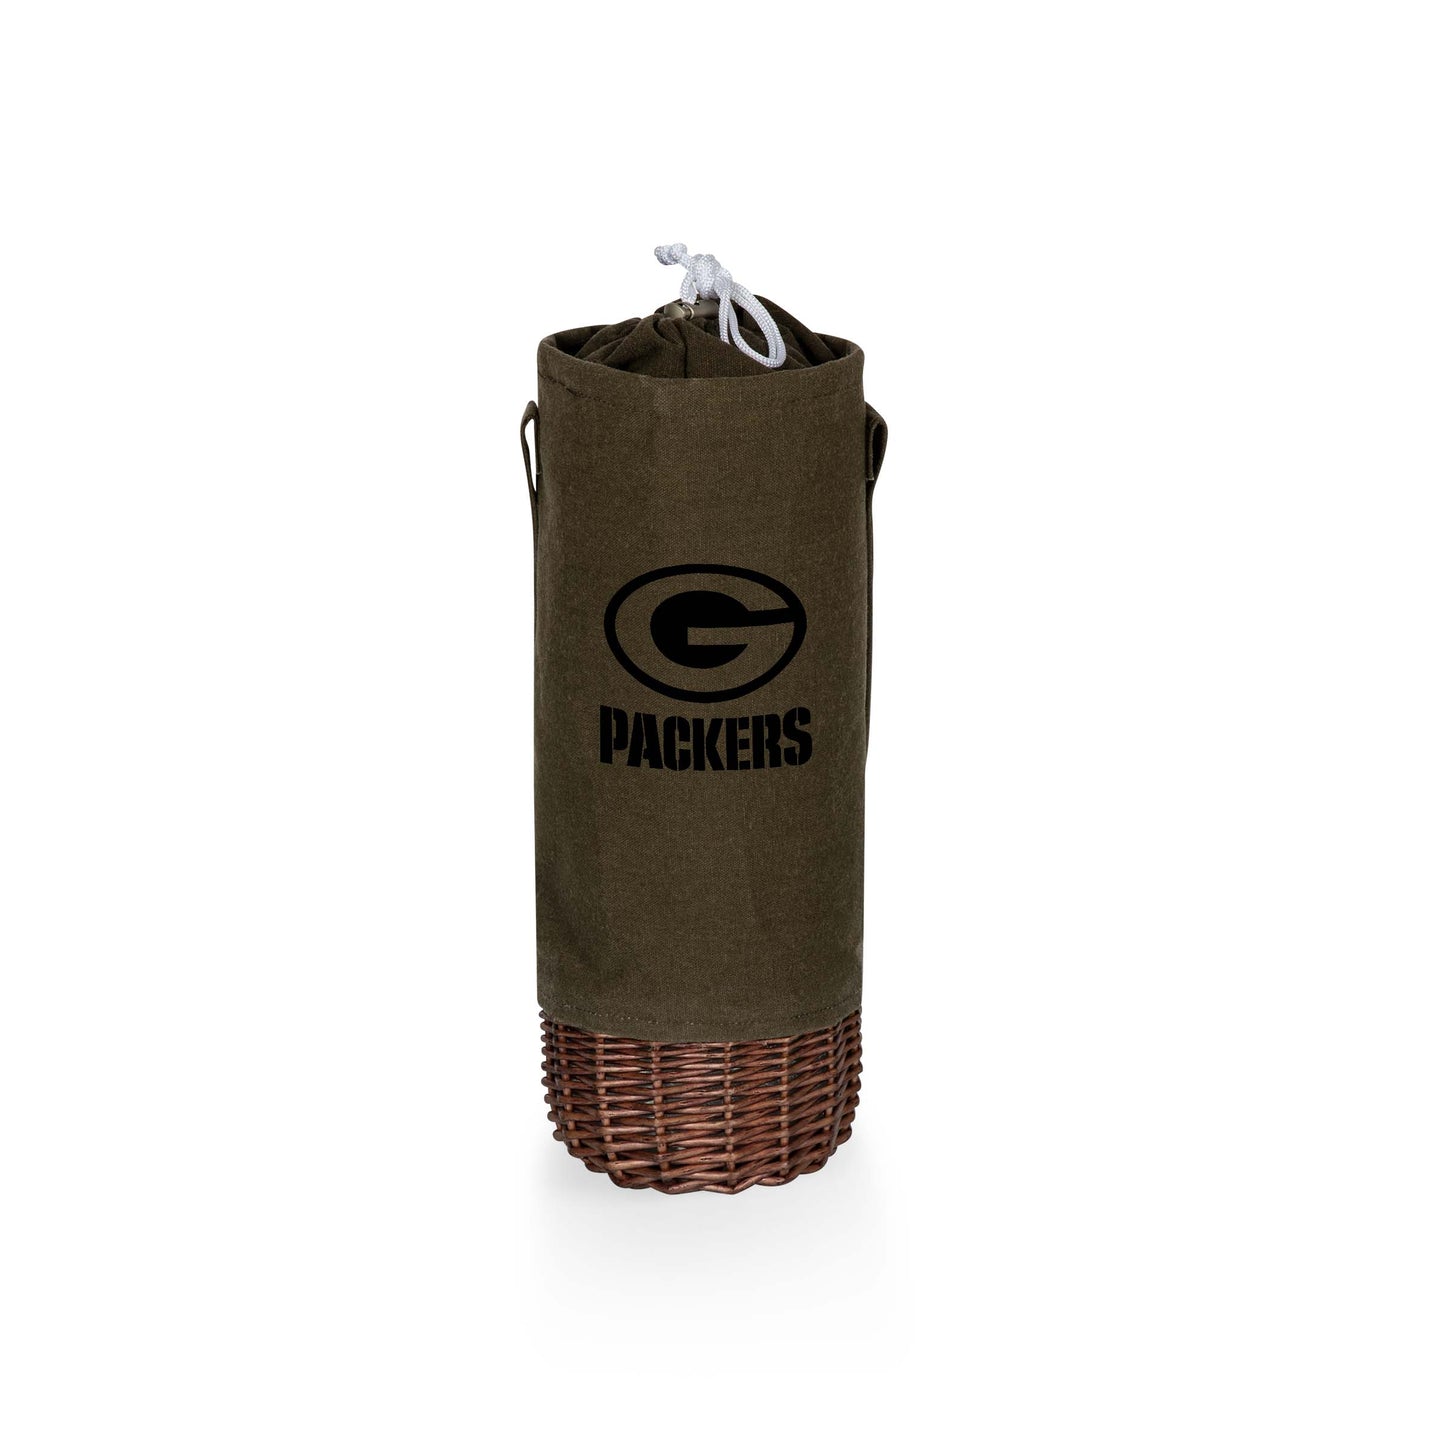 Green Bay Packers - Malbec Insulated Canvas and Willow Wine Bottle Basket